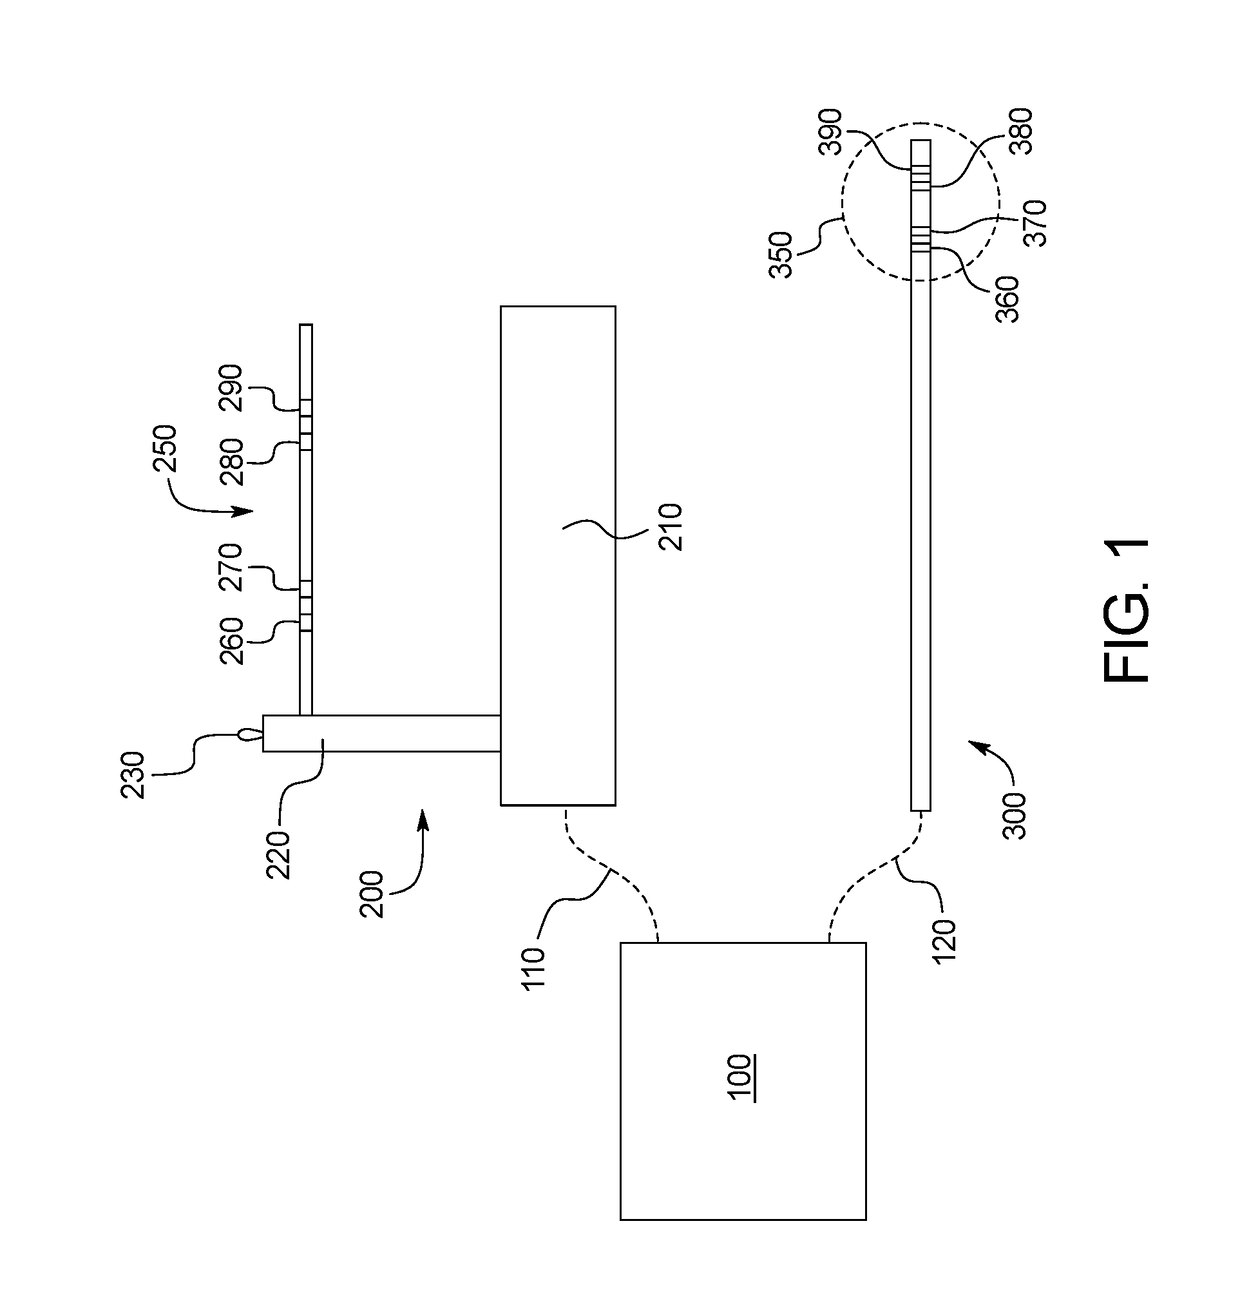 Control system for elongate instrument